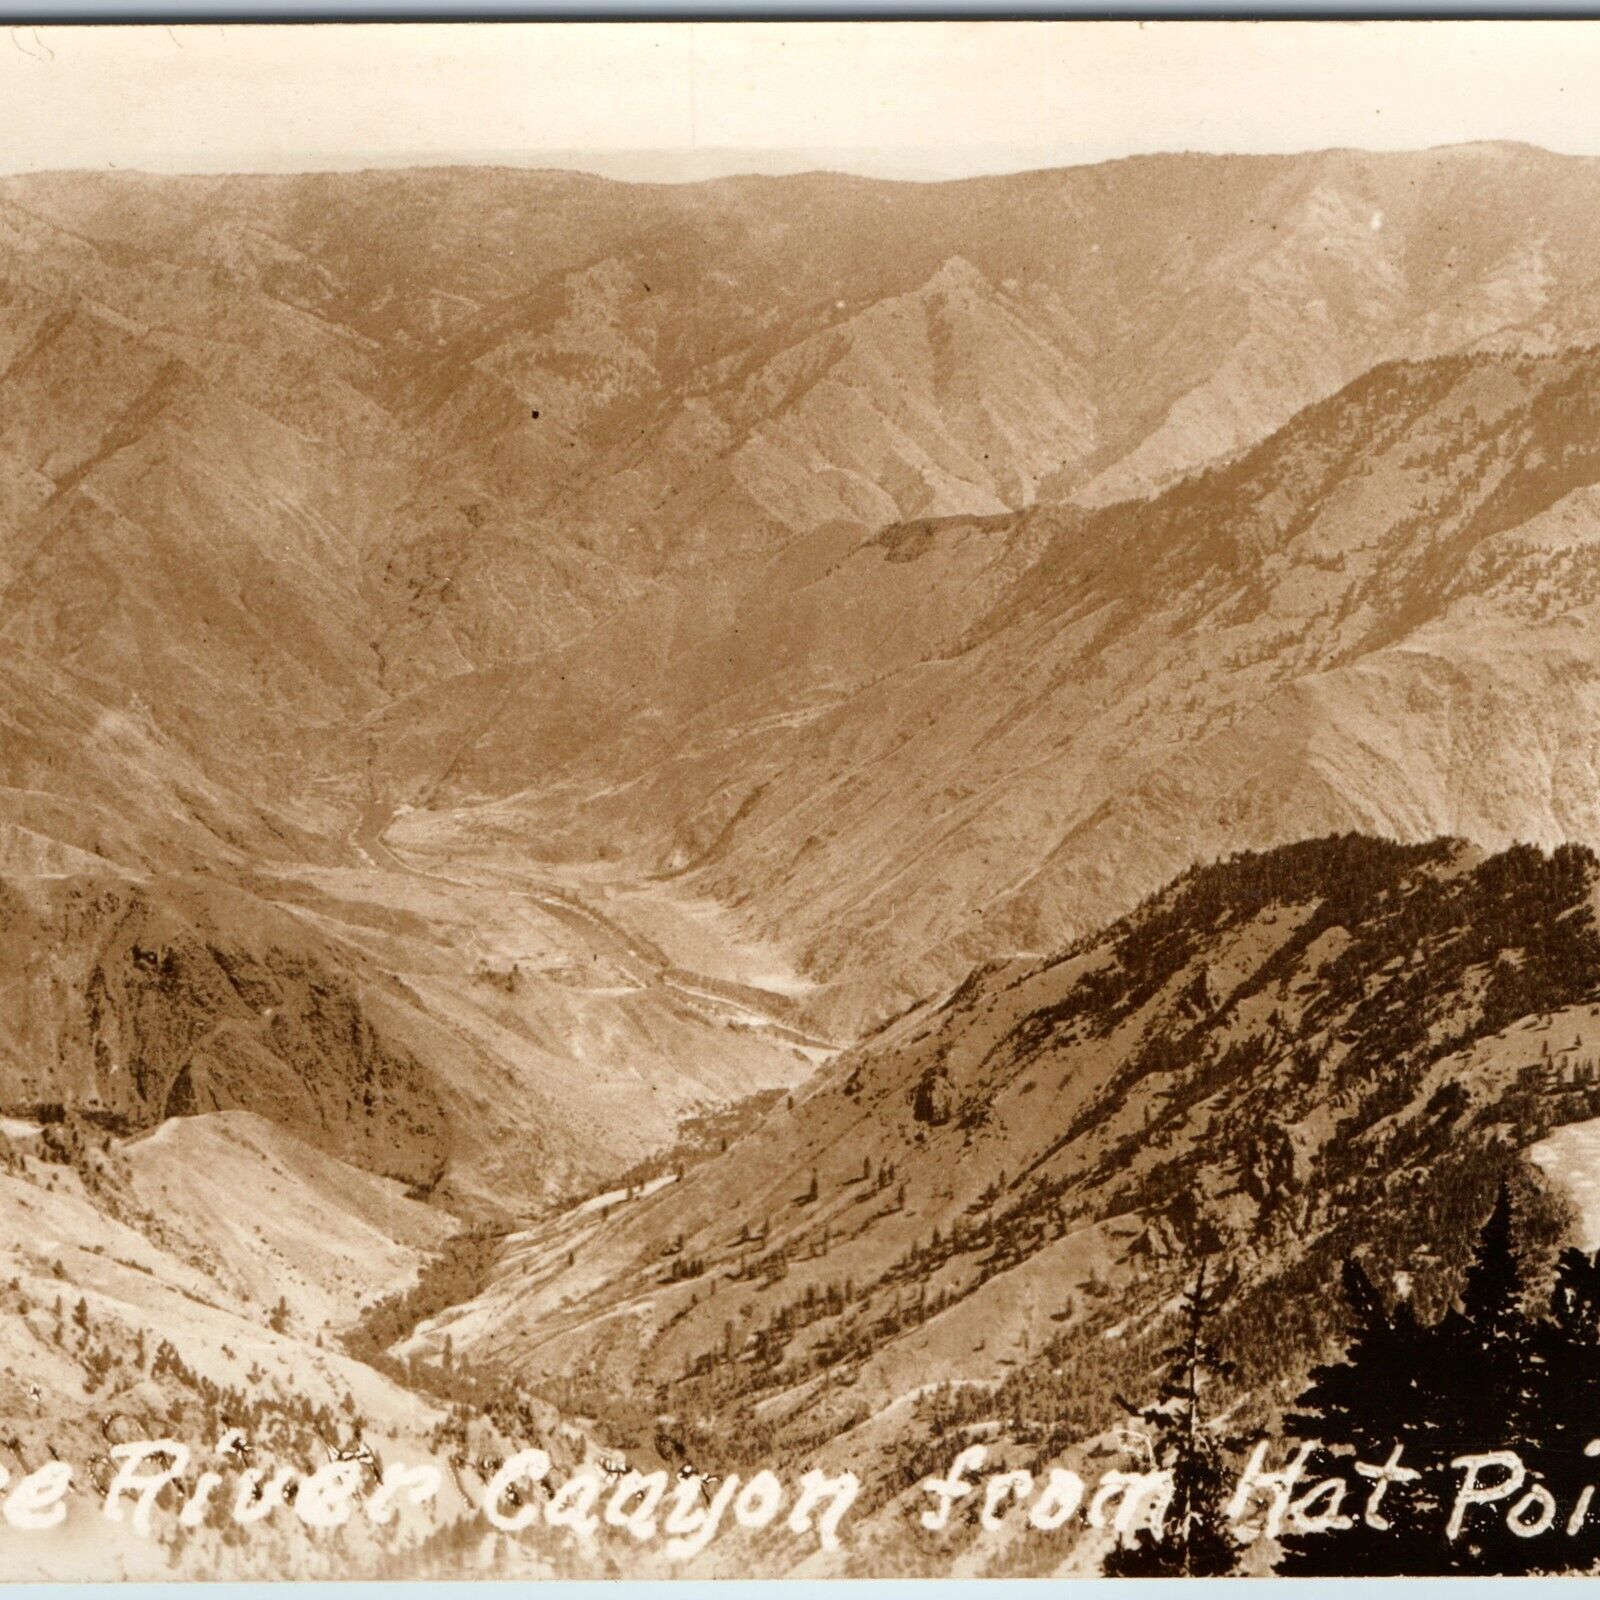 c1930s Hot Point Ore RPPC Snake River Canyon Birds Eye Scenic Real Photo OR A200